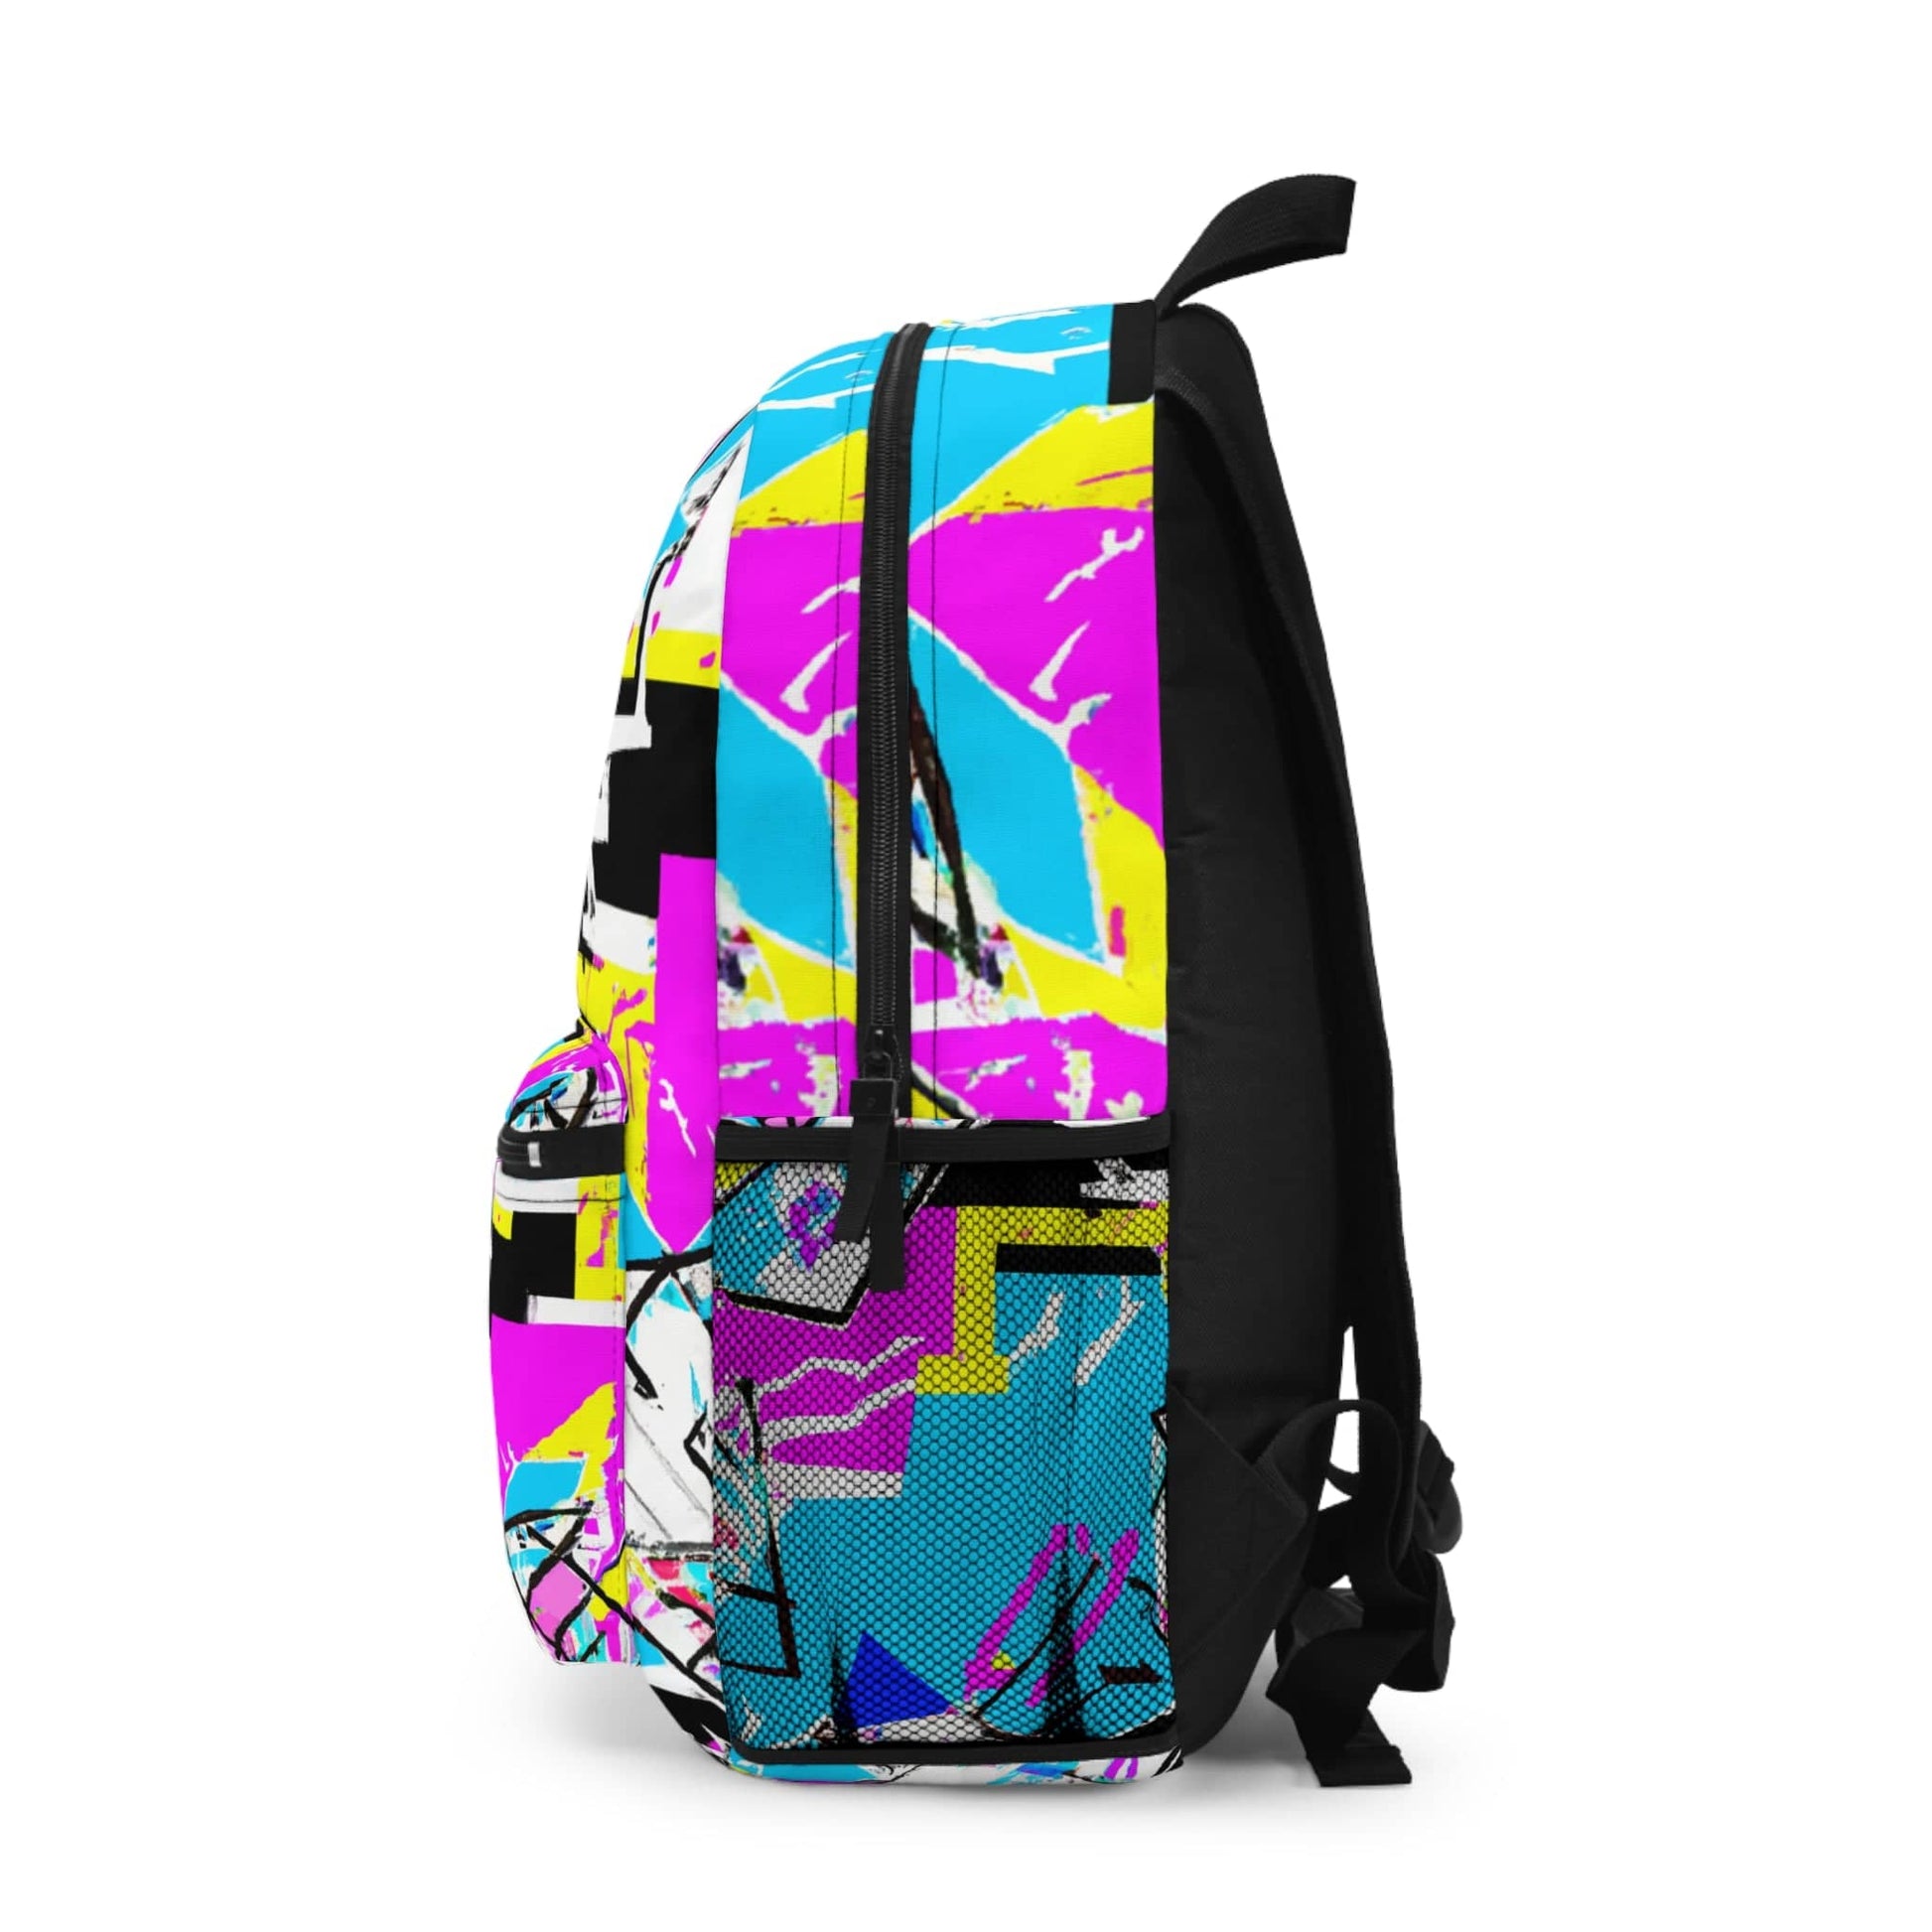 GraffitiScribe: The Edgy Canvas Graffiti Bookbag for School, Travel, Urban Art Lovers, and Trendsetters Bags Bigger Than Life   